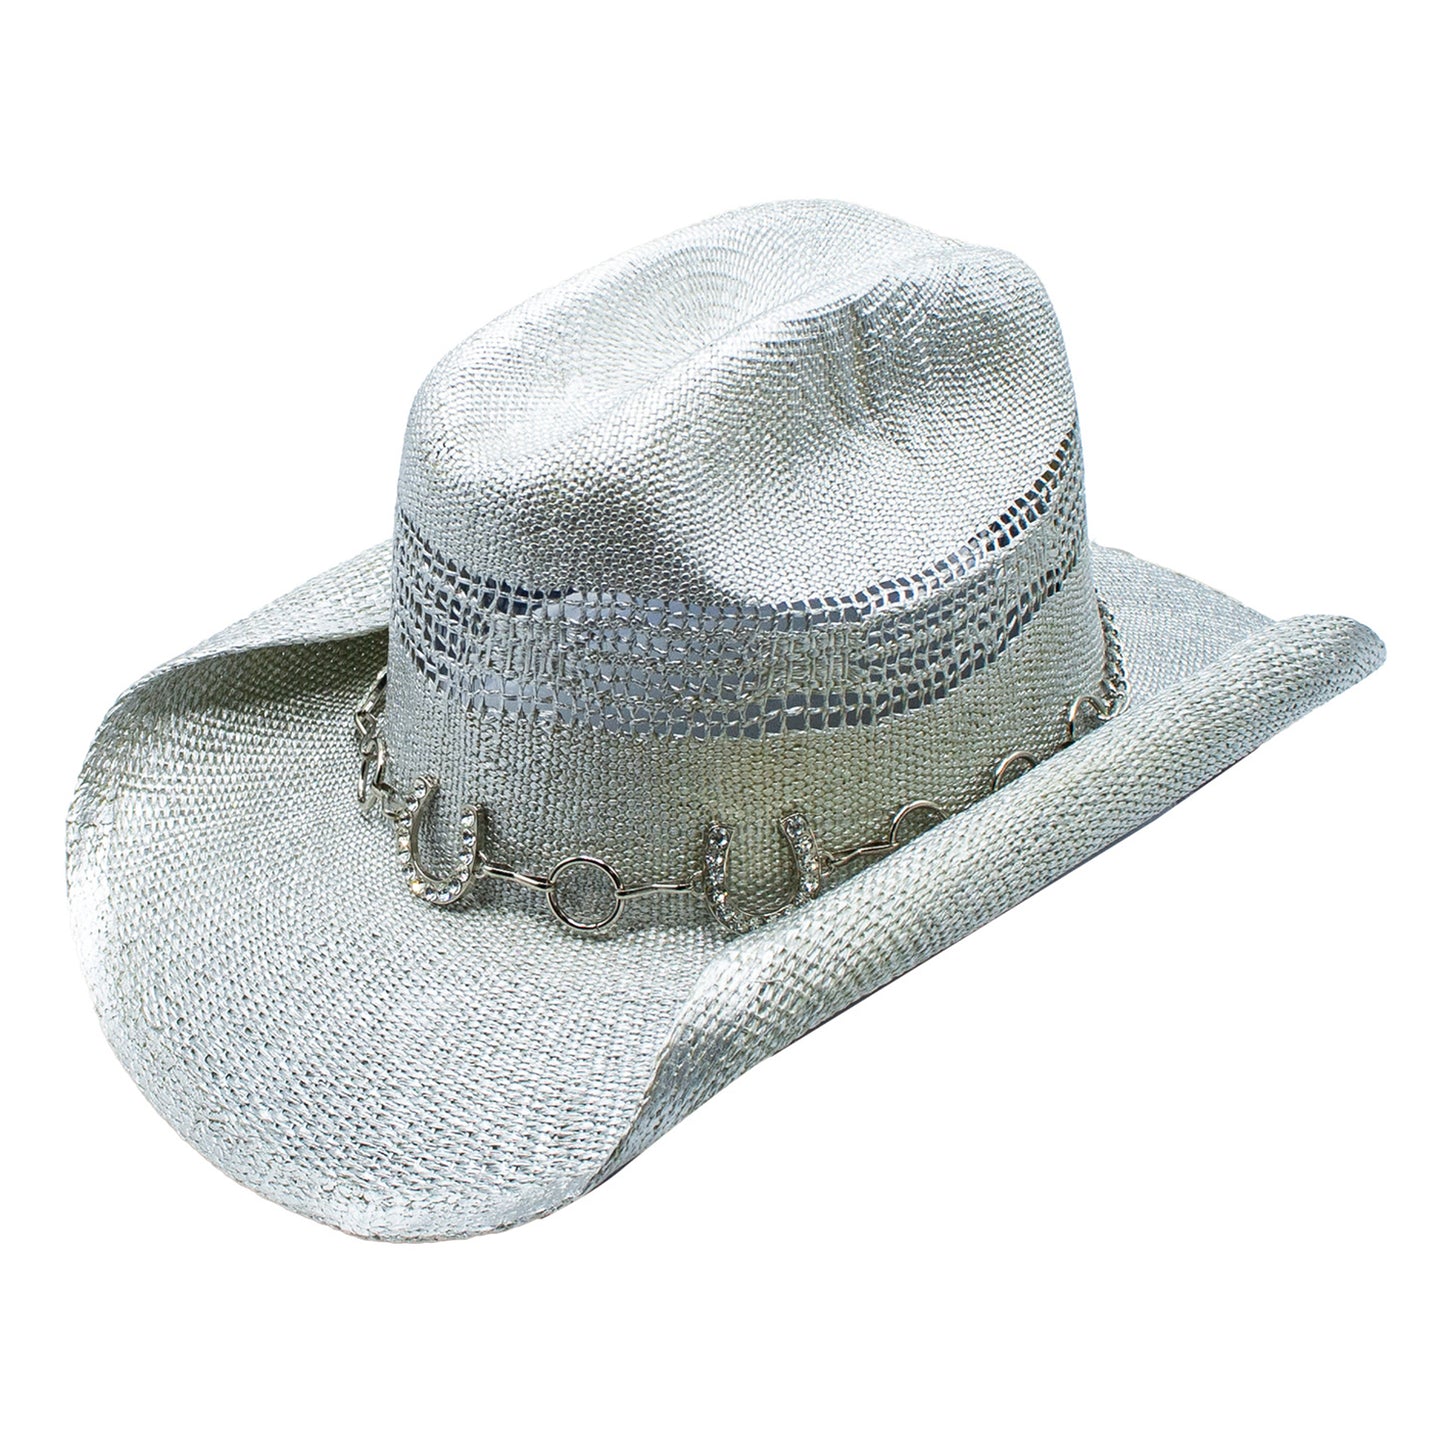 Warrior Silver Cowboy Hat by Peter Grimm - Bourbon Cowgirl